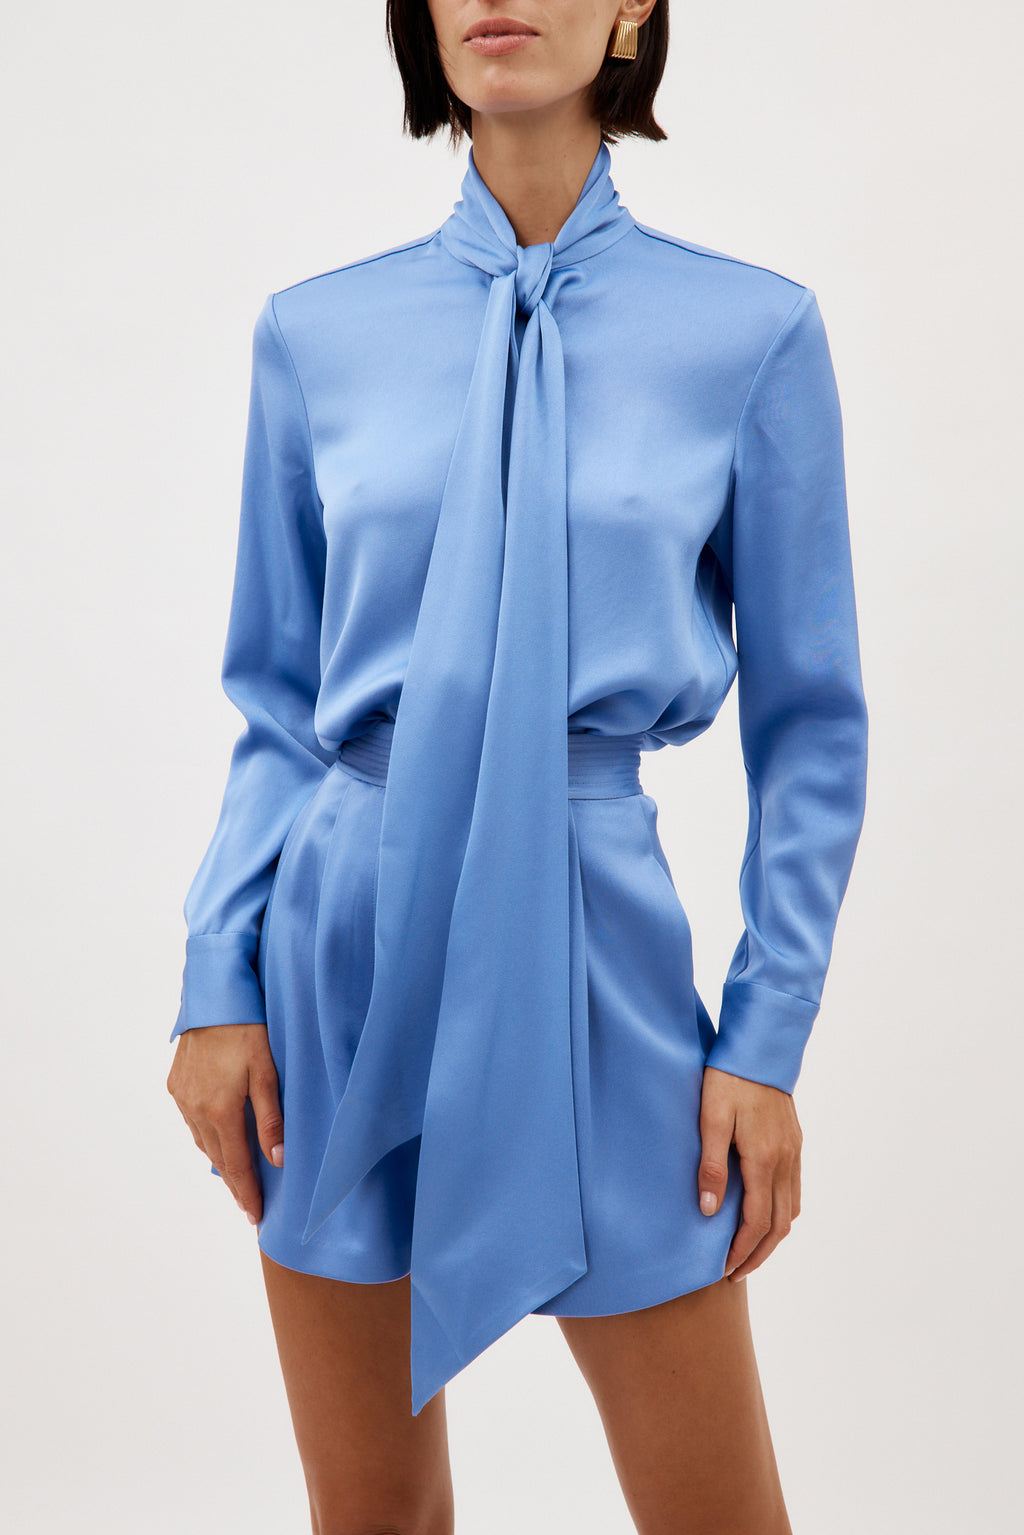 Satin Crepe Pussy Bow Periwinkle Shirt